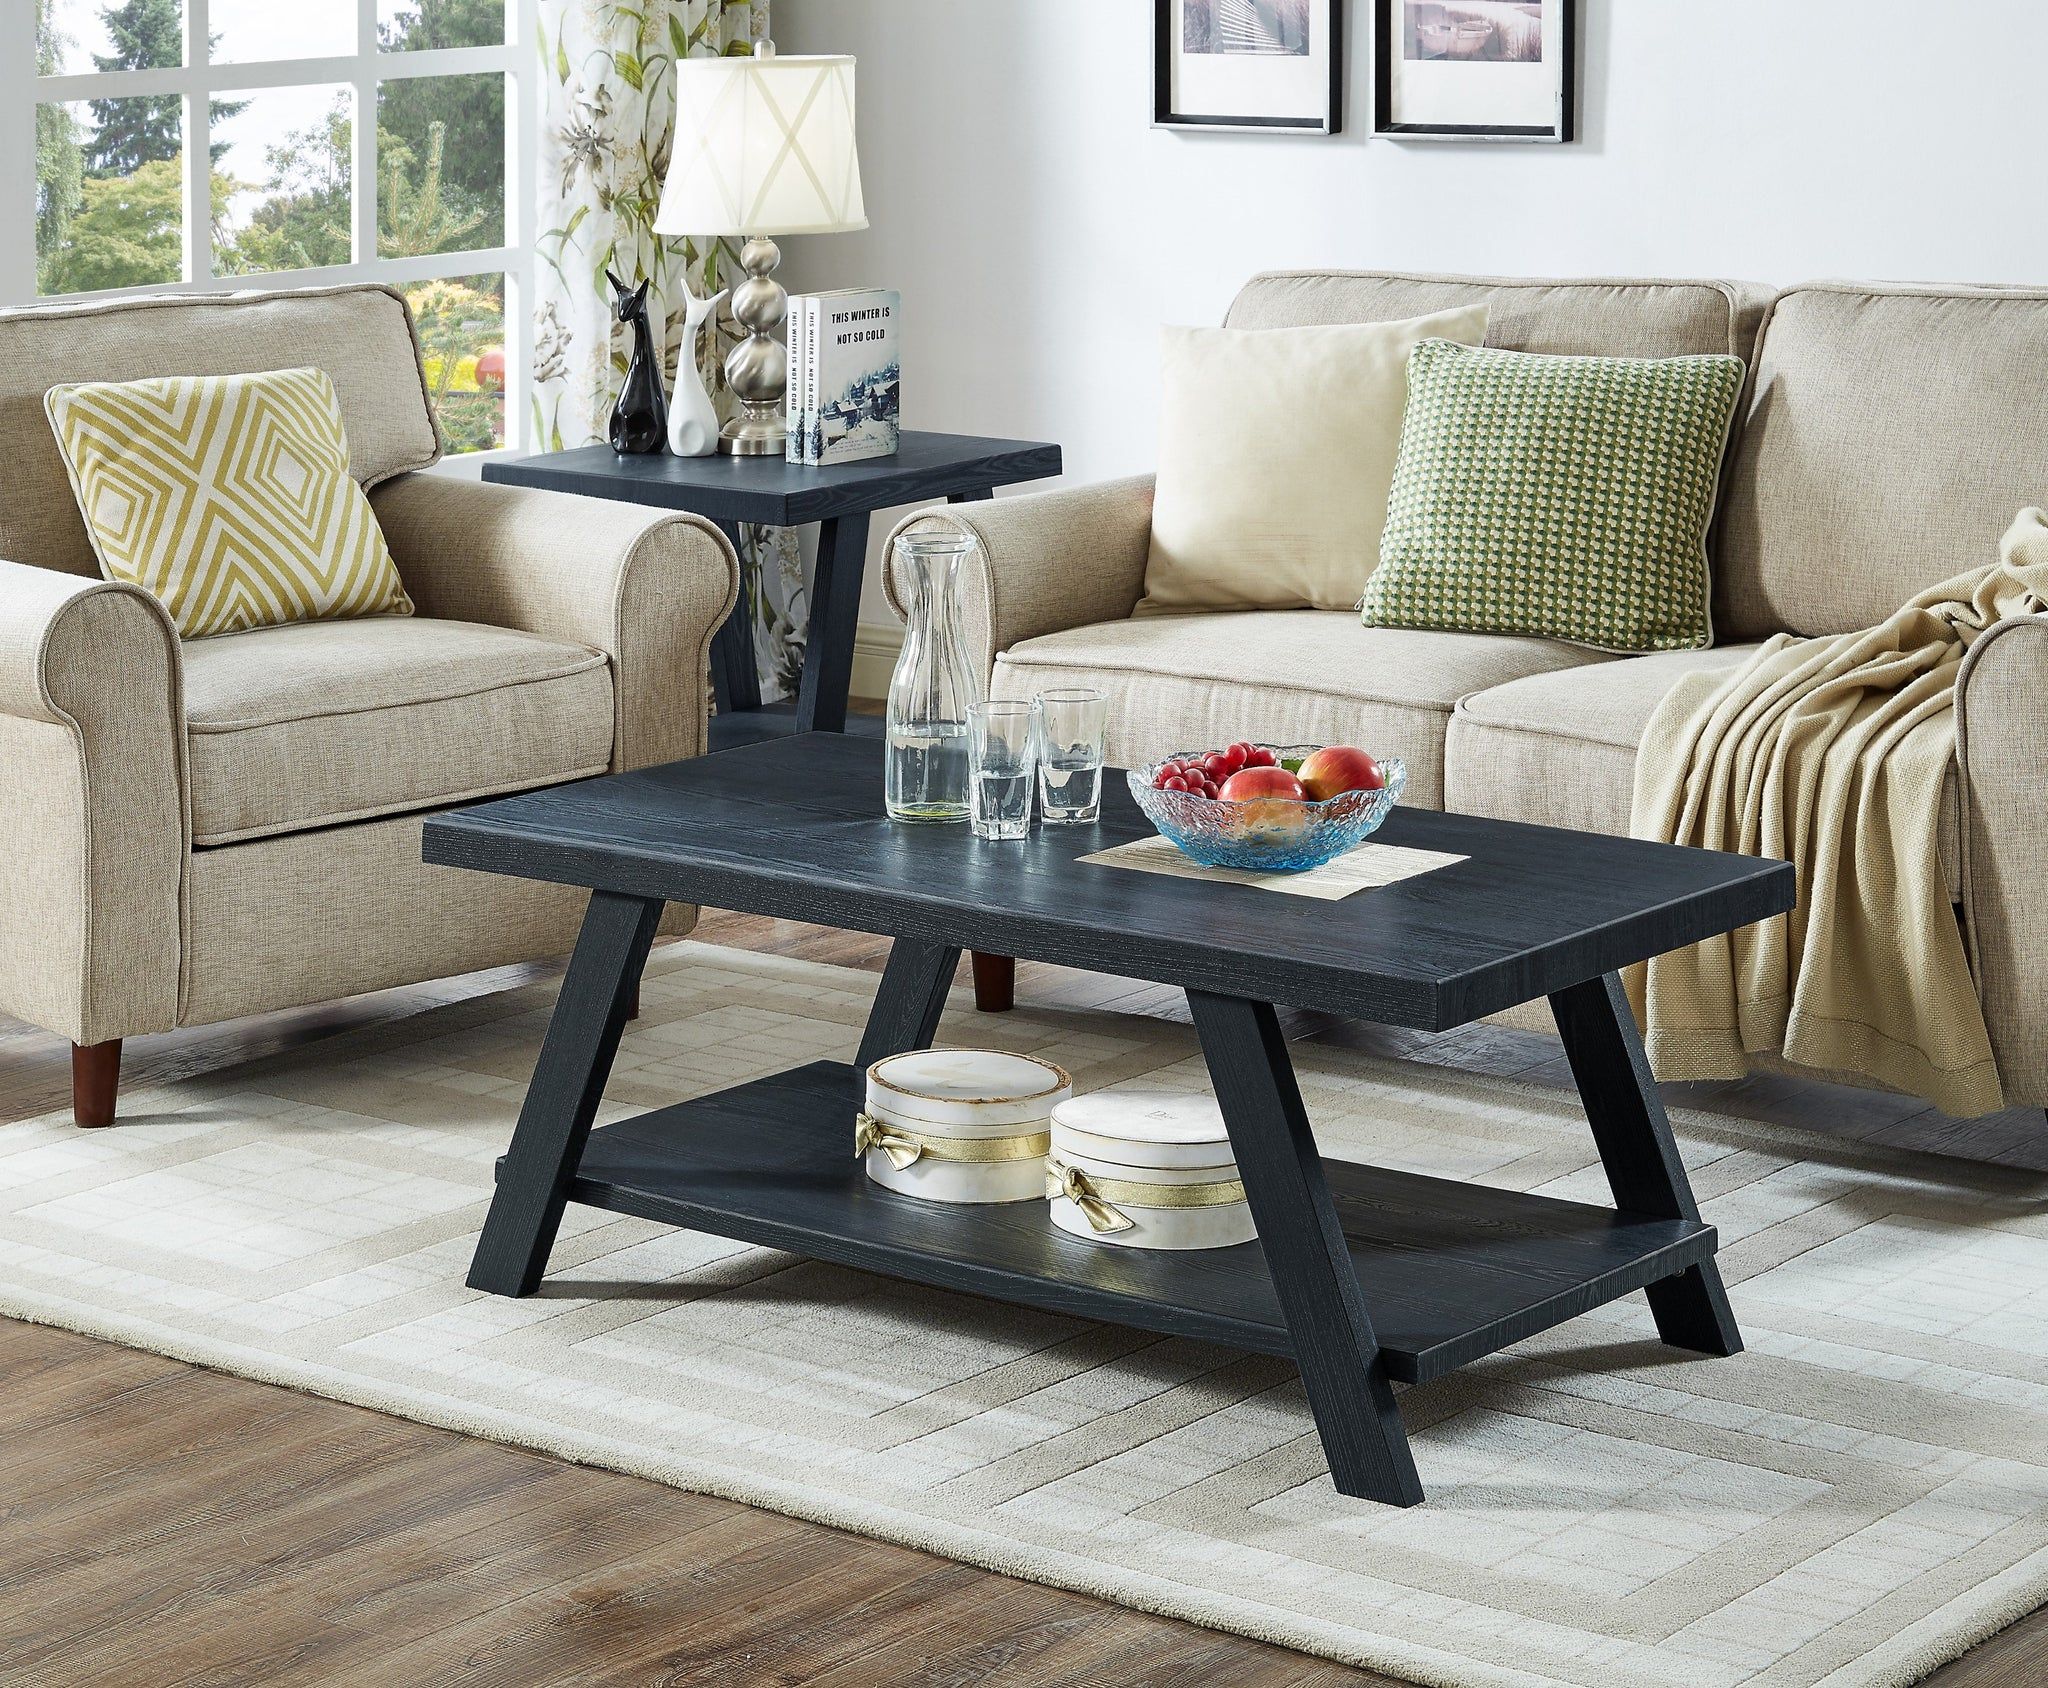 Athens Contemporary Replicated Wood Shelf Coffee Set Table In Black Fi In Pemberly Row Replicated Wood Coffee Tables (View 4 of 20)